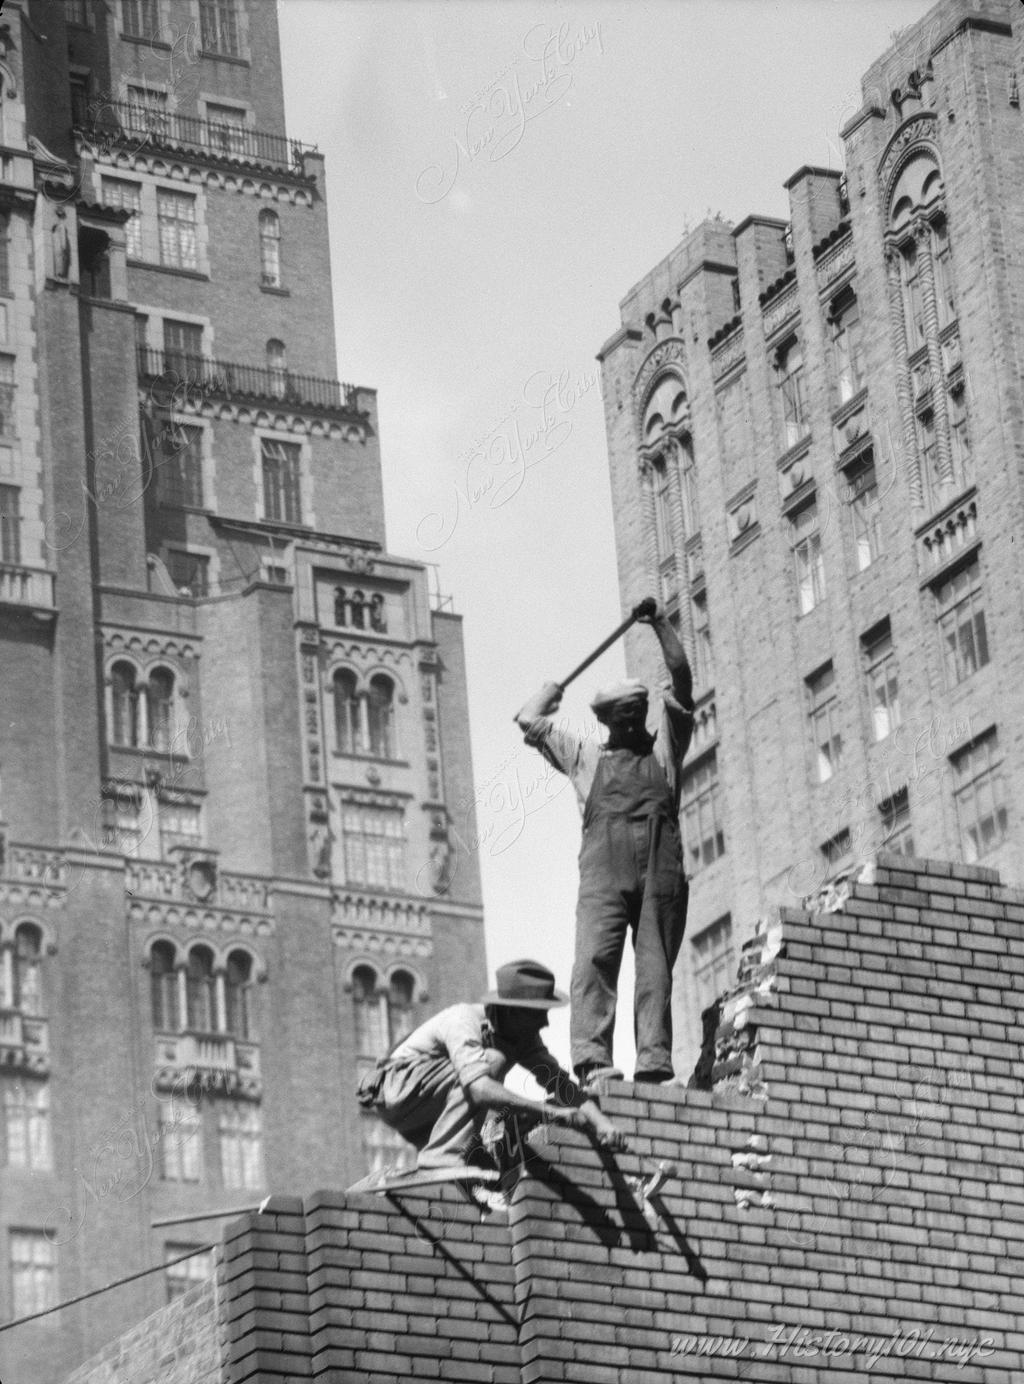 Photograph of a pair of construction workers demolishing a wall.